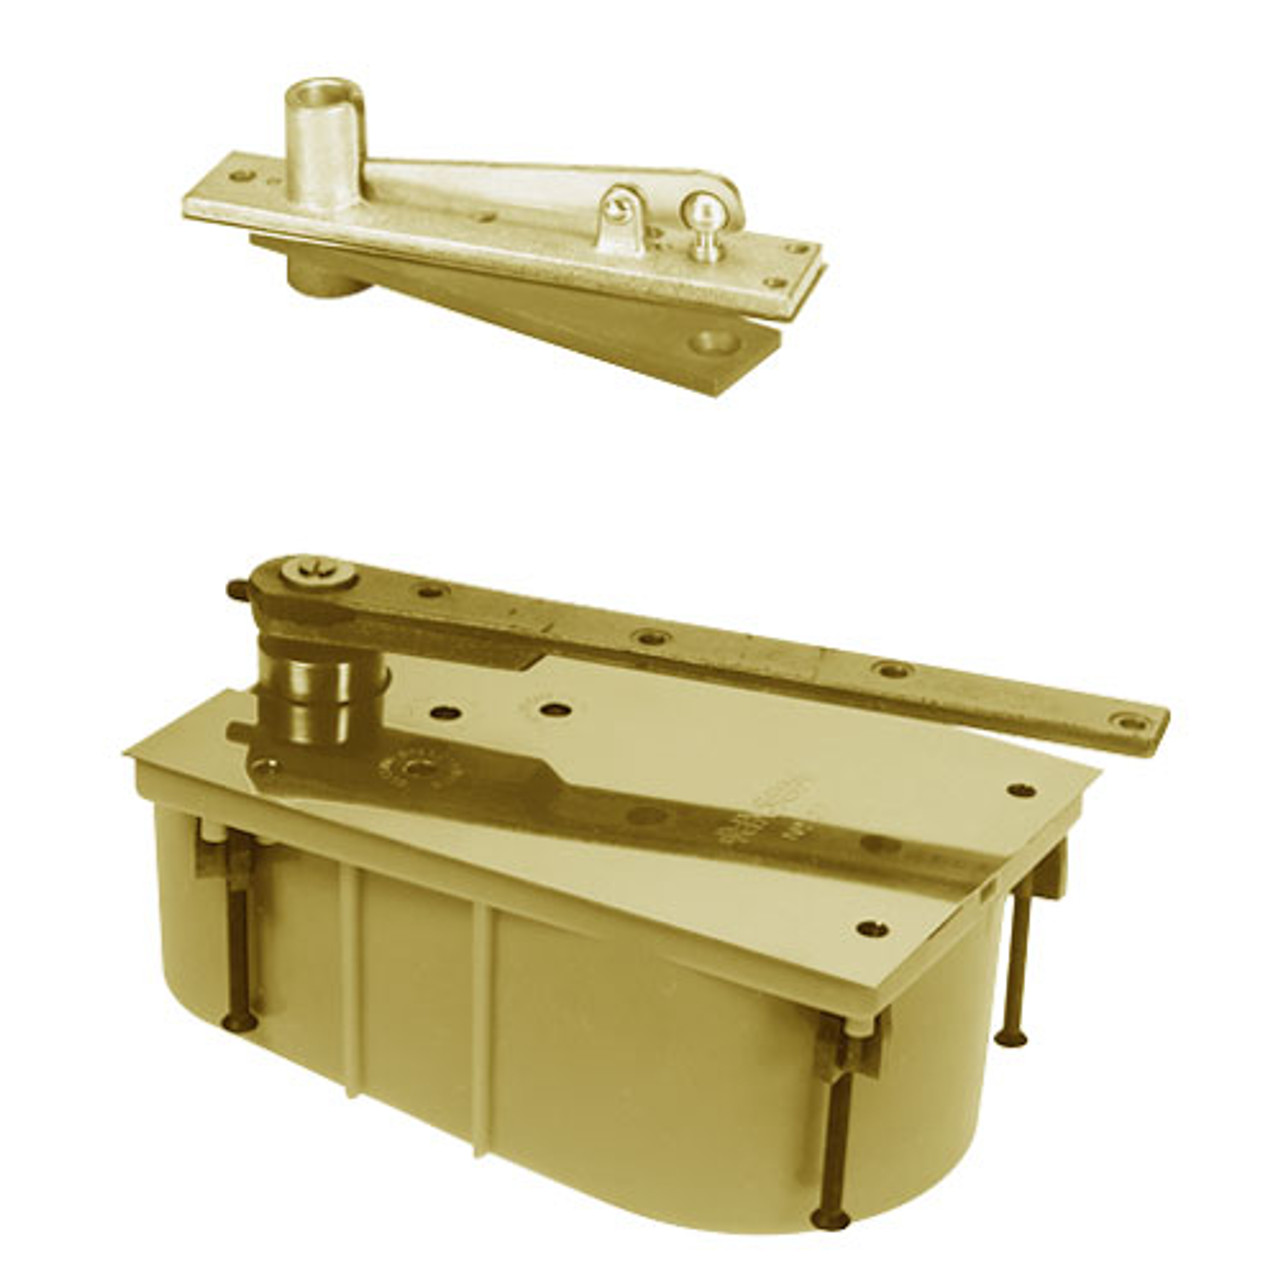 28-105N-554-LH-606 Rixson 28 Series Heavy Duty Single Acting Center Hung Floor Closer with Concealed Arm in Satin Brass Finish